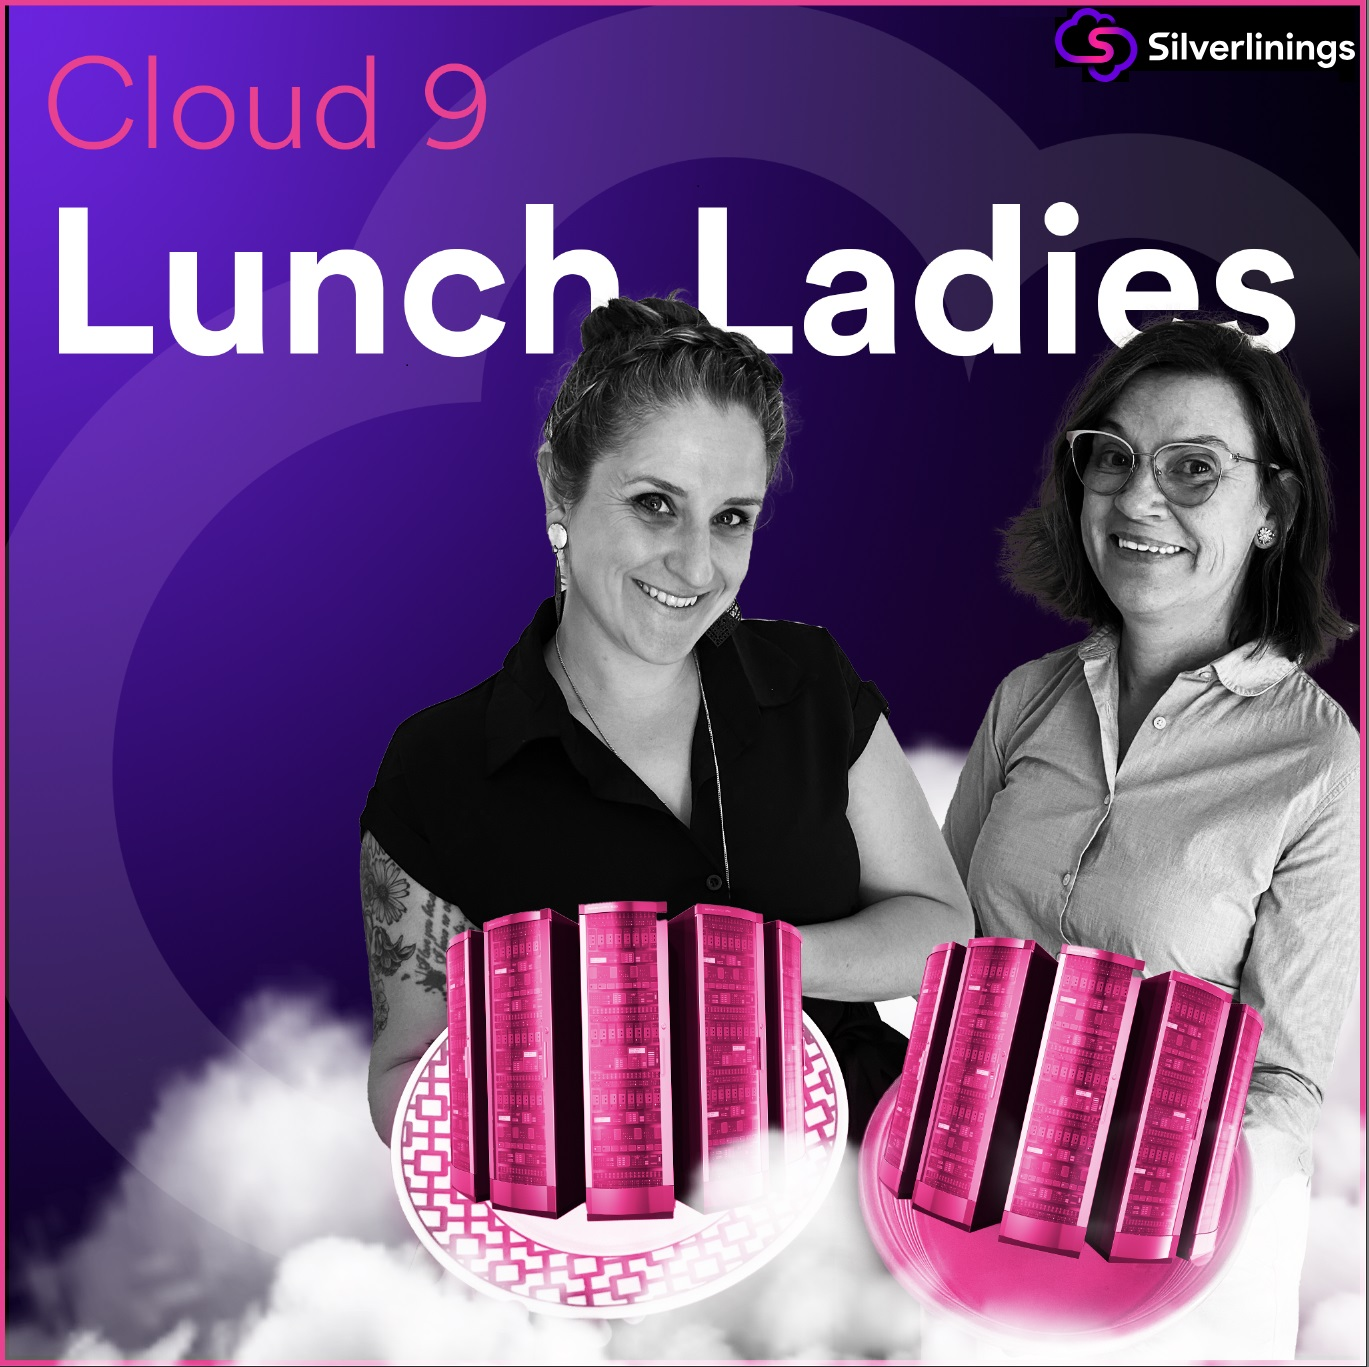 Cloud 9: Lunch Ladies News Wrap - AI, telco cloud strategies and Yum! brands